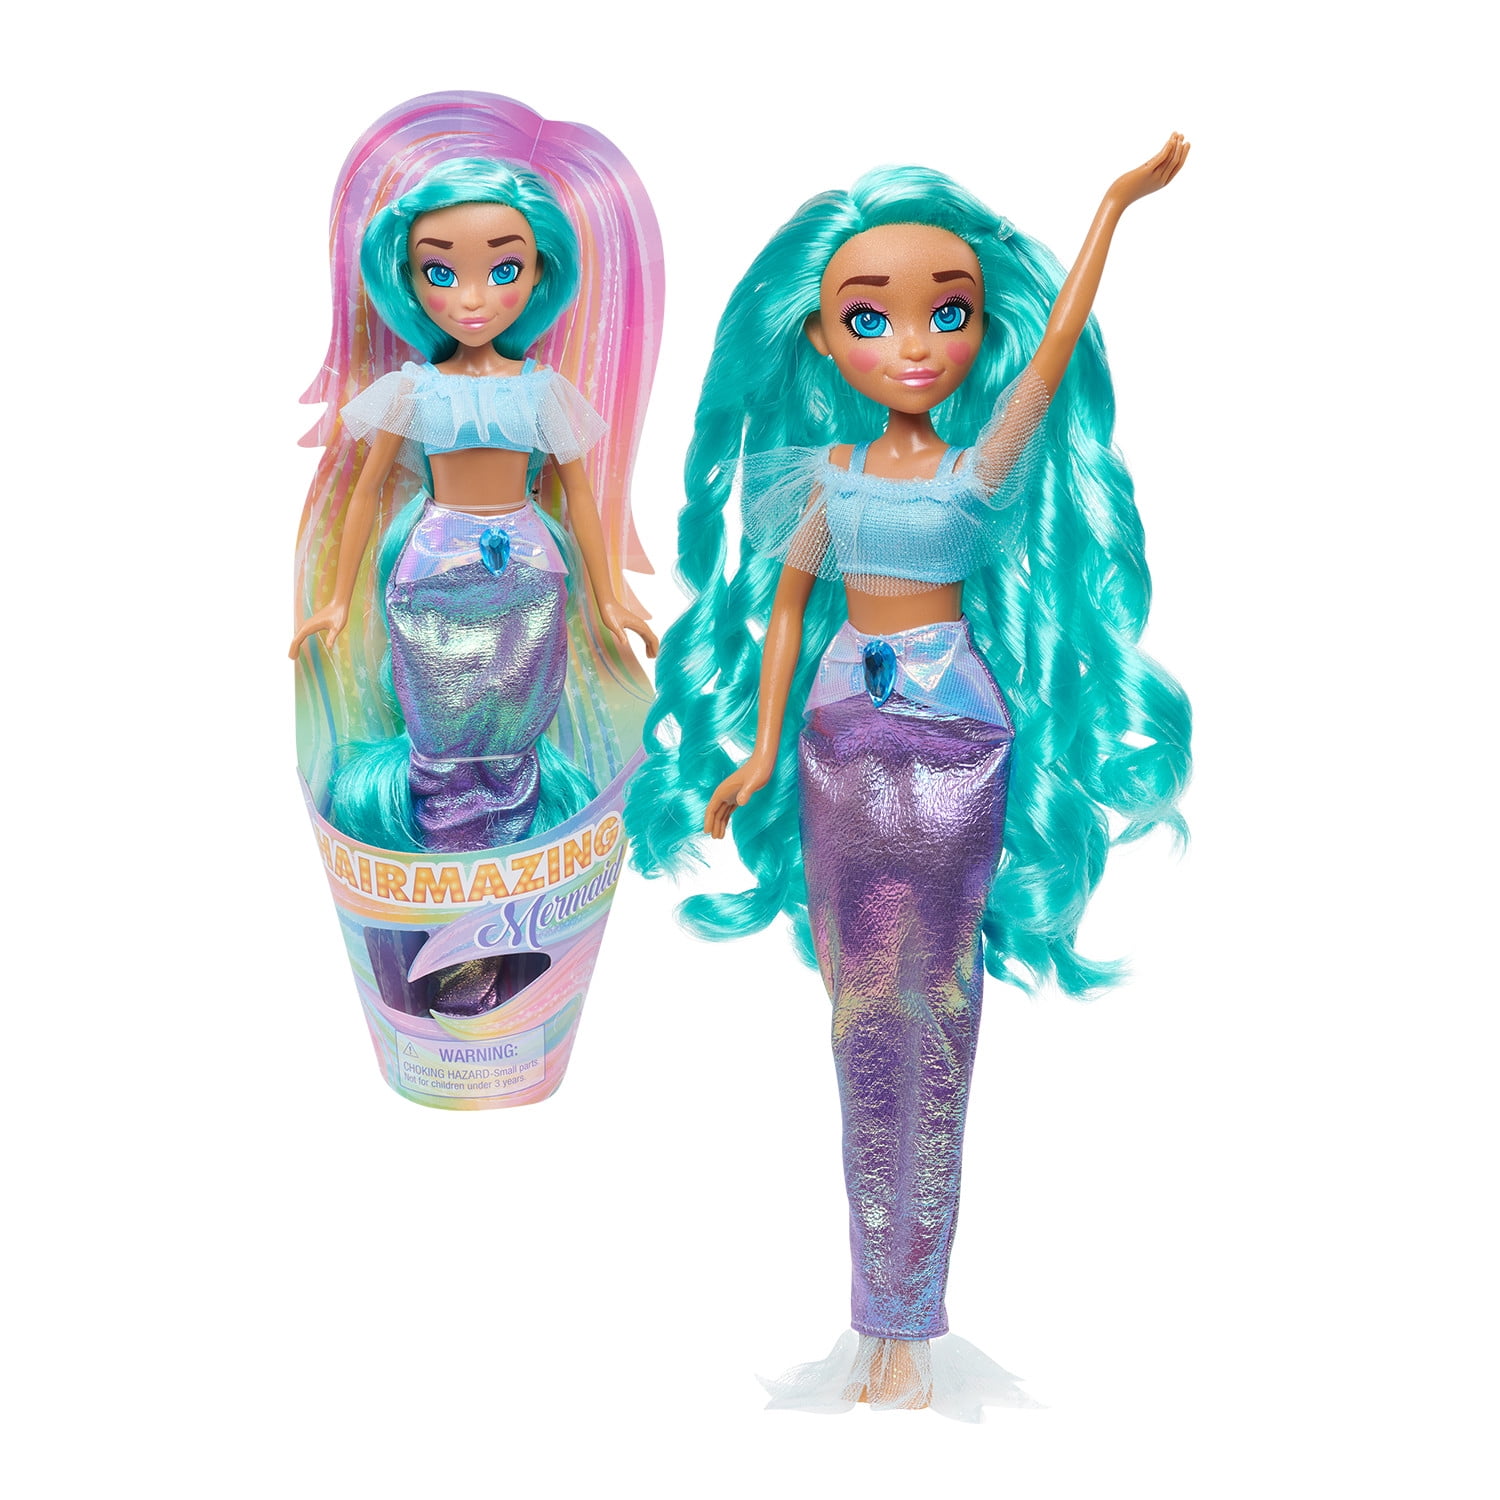 Hairmazing Collectible Fashion Dolls, Styles May Vary,  Kids Toys for Ages 3 Up, Gifts and Presents